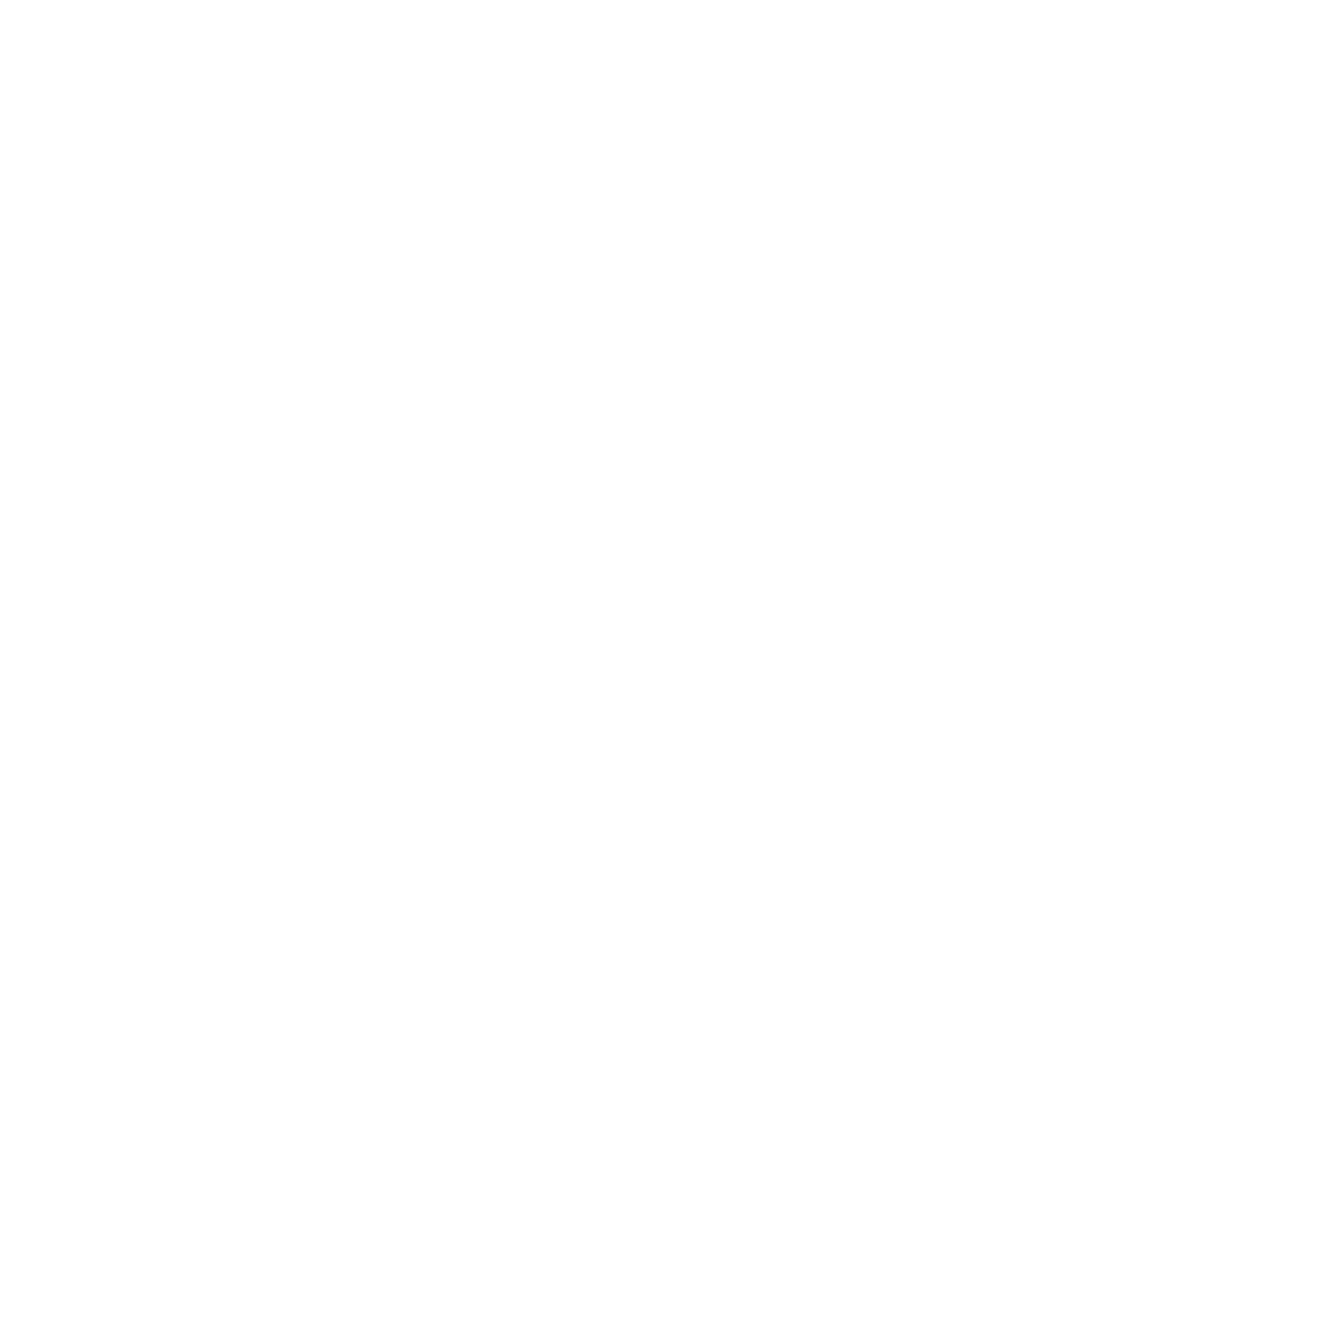 File:Irps logo new.png - Wikipedia